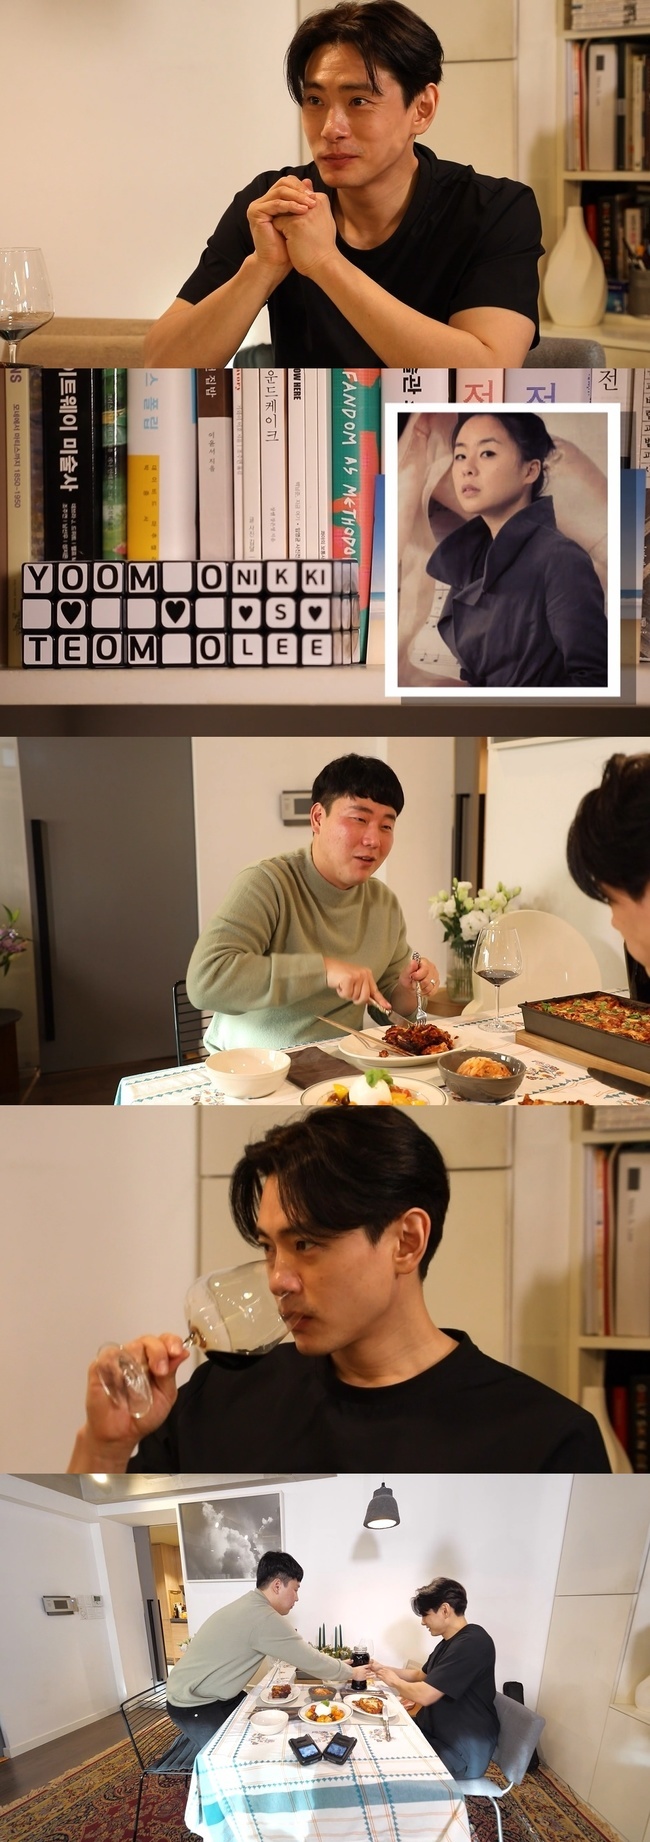 Actor Teo Yoooooo reveals Our Love Story with 11-year-old Association wifeMBC Point of Omniscient Interfere broadcasted on January 9th will reveal the figure of Teo Yooooo, who conveys the know-how of marriage life.On this day, Teo Yooooo and Manager are talking about married mens truth.Teo Yoooooo is a back door that revealed a romantic honey tip to the surprise troubles of the manager for a month of marriage.If we fight, we have to see the end of the day, Teo Yoooooo tells Yubu World Living Point.Indeed, it stimulates curiosity about what the express secret Teo Yooooo passed on to Manager.Especially on this day, Teo Yooooo reveals the true love story with 11-year-old association wife and famous writer Nikkiri, and attracts Eye-catching.Our Love Story, like two movies that started in New York City, will be dyed with excitement.Expectations add to the marriage behind the tying of Teo Yoooooo, who has said it is complete pure love.